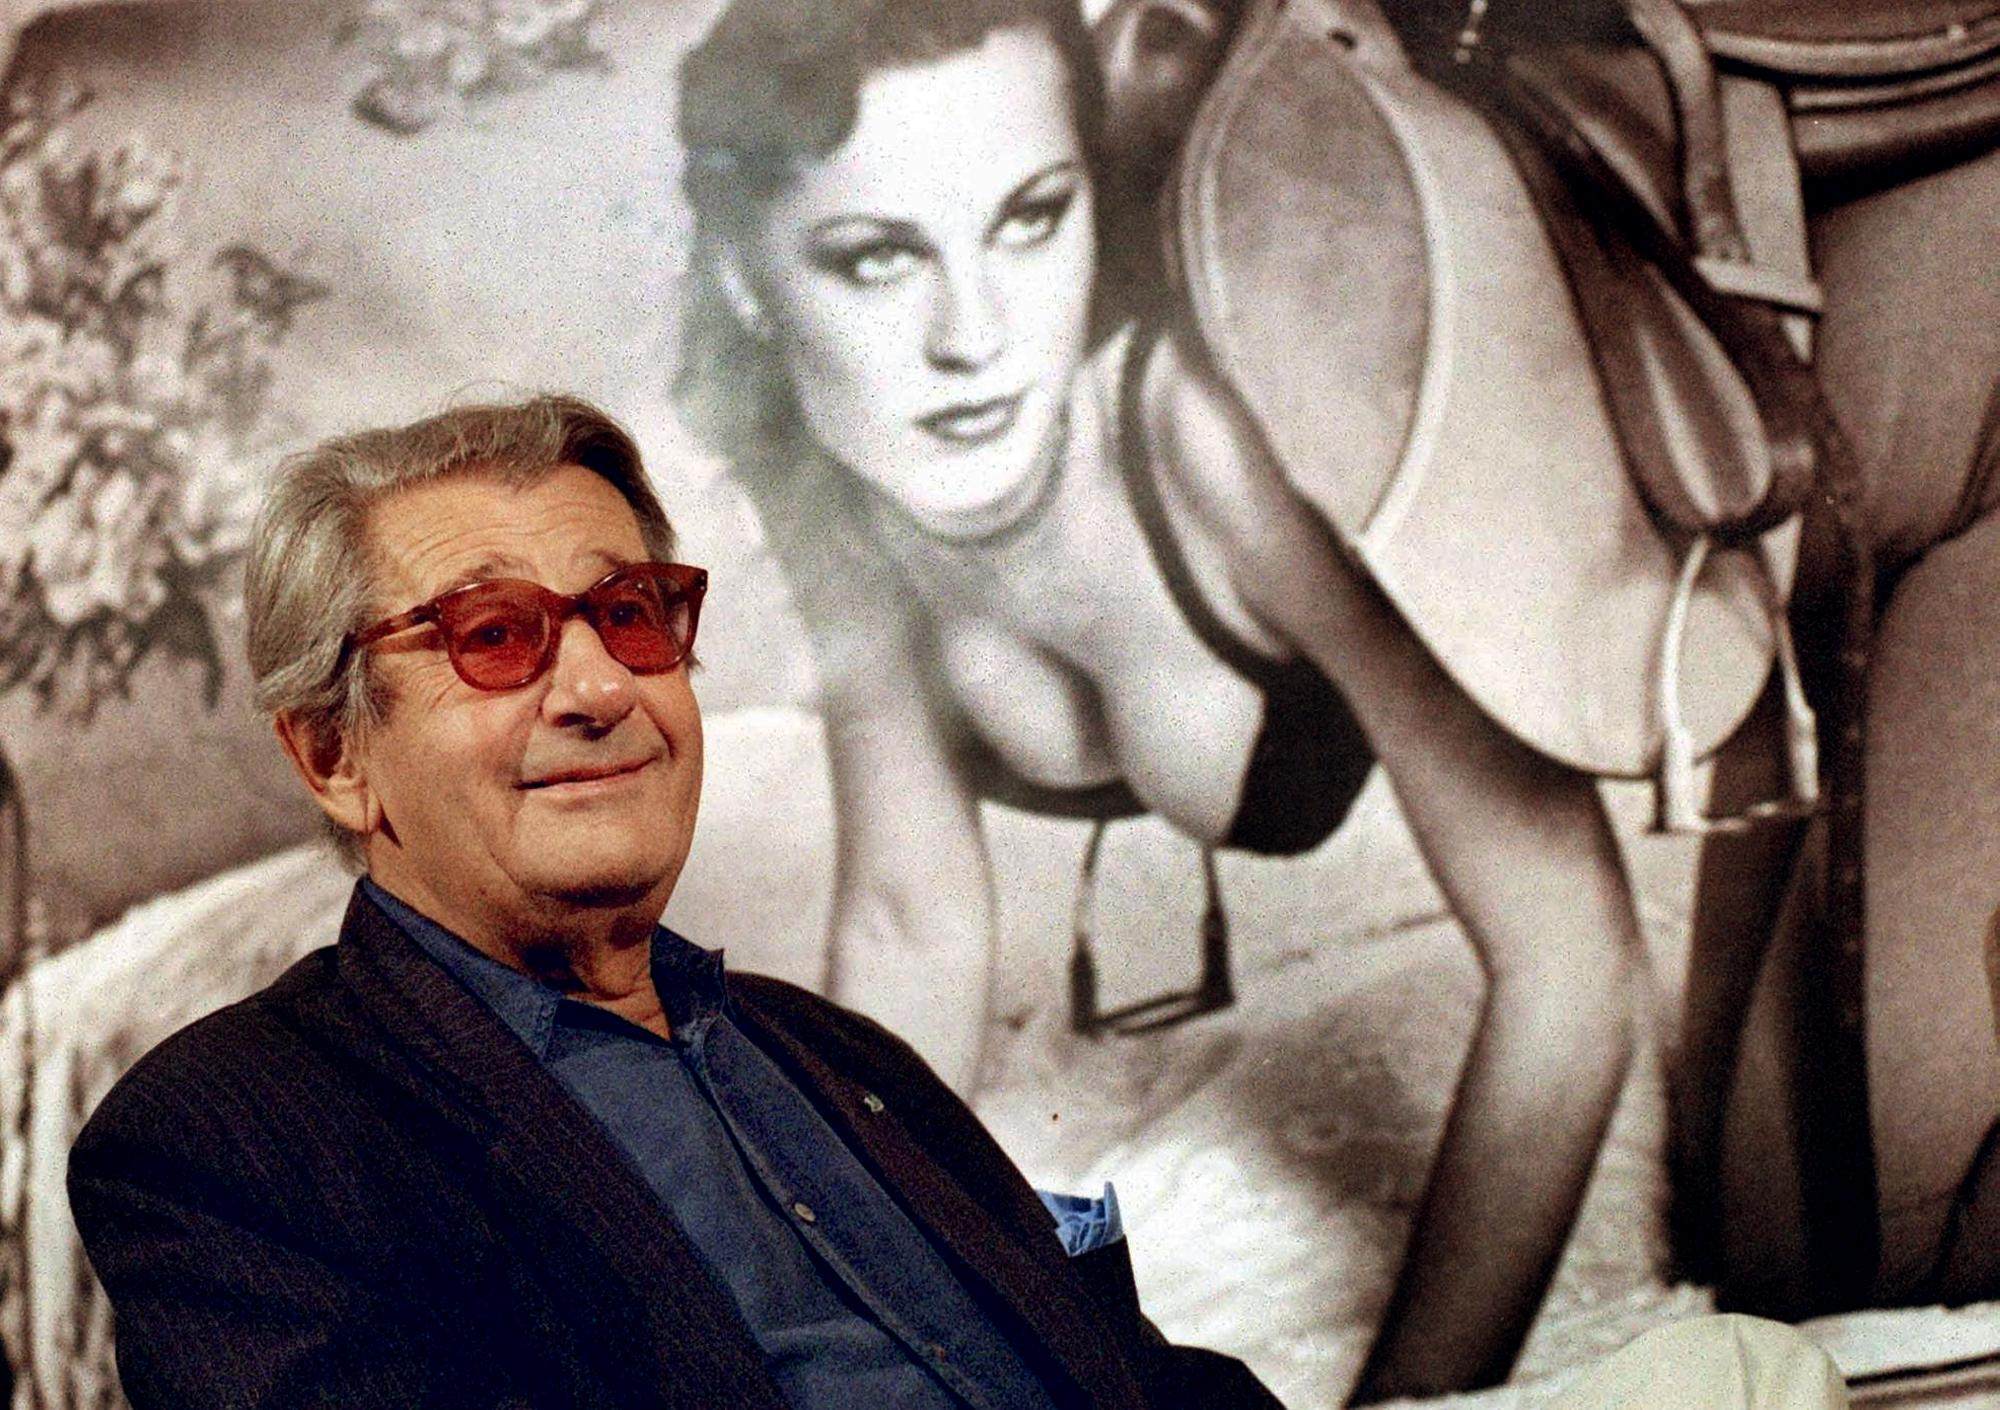 German-Australian photographer Helmut Newton poses in front of his “Saddle I, Paris, 1976” in Hamburg, Germany, on July 19, 2001. An exhibition celebrating his works is set to be held at the Marta Ortega Pérez Foundation in A Coruña, Spain. Photo: AFP